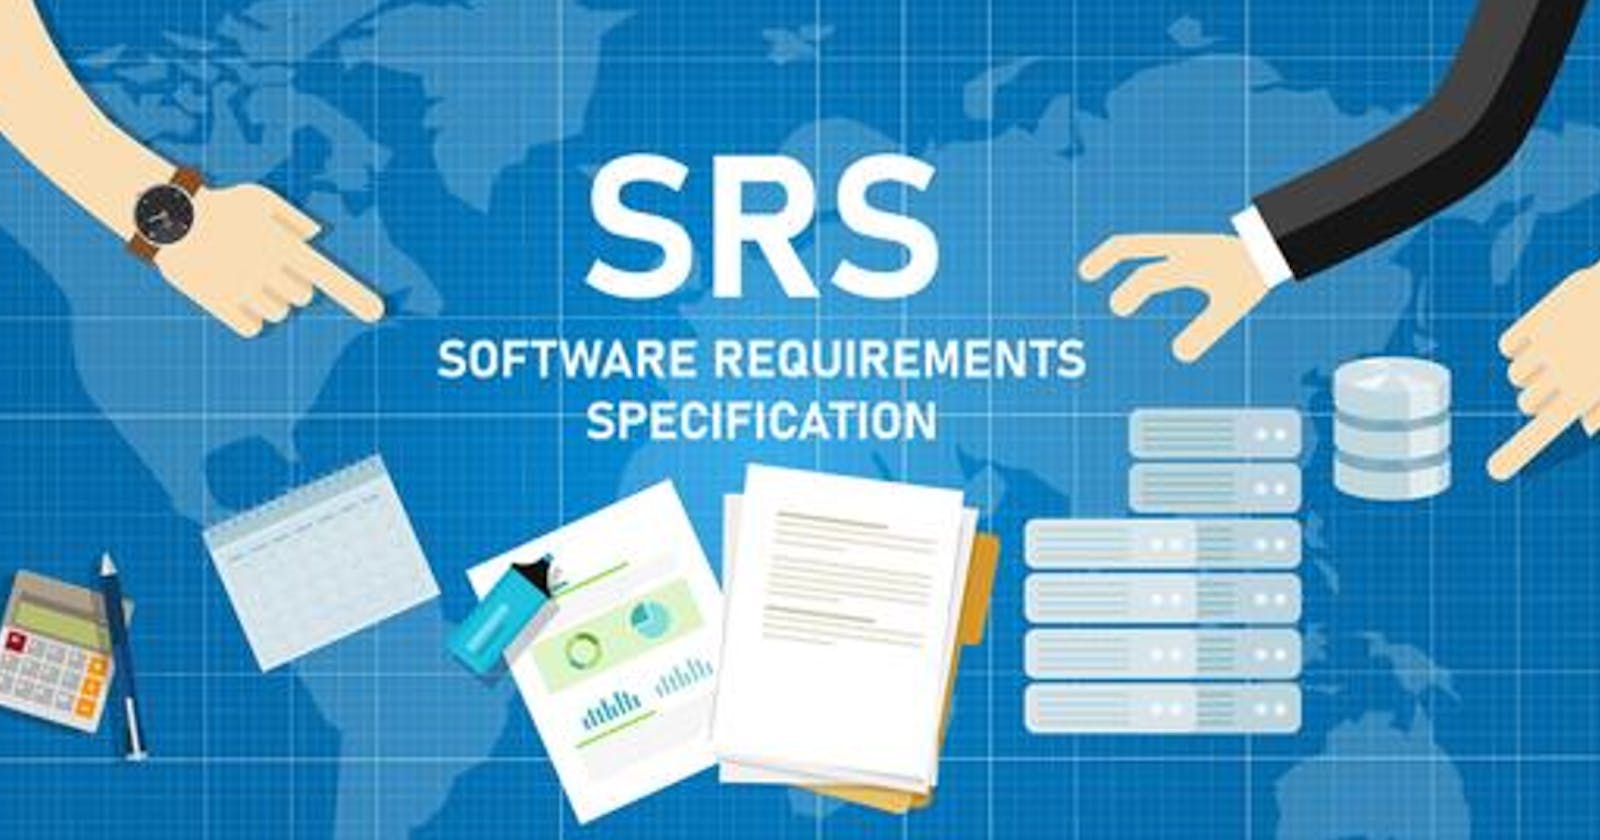 Software Requirements Specification: A roadmap to Software Development.